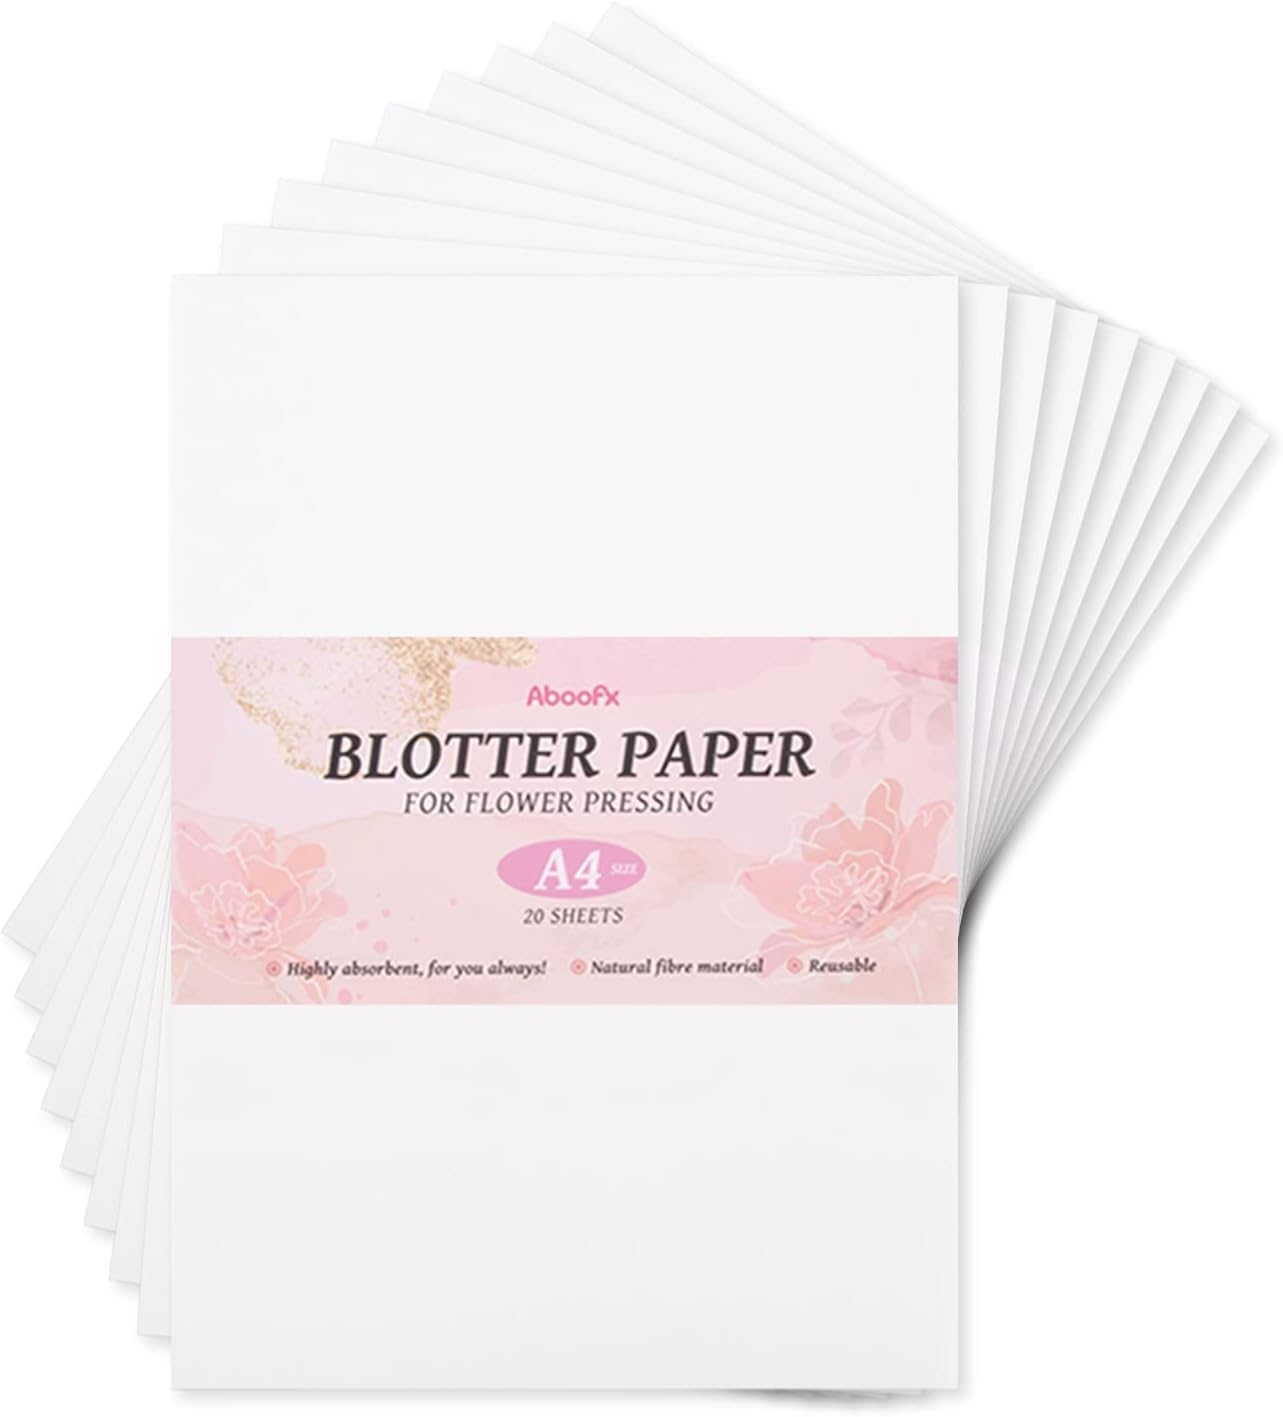 20 sheets Blotting Paper for Flower Press, Large A4 Highly Absorbent and Reusable Blotter Paper for Flower Press Herbarium Paper Craft 8.26 x 11.8 inch Blotter Paper Sheets - image 1 of 7